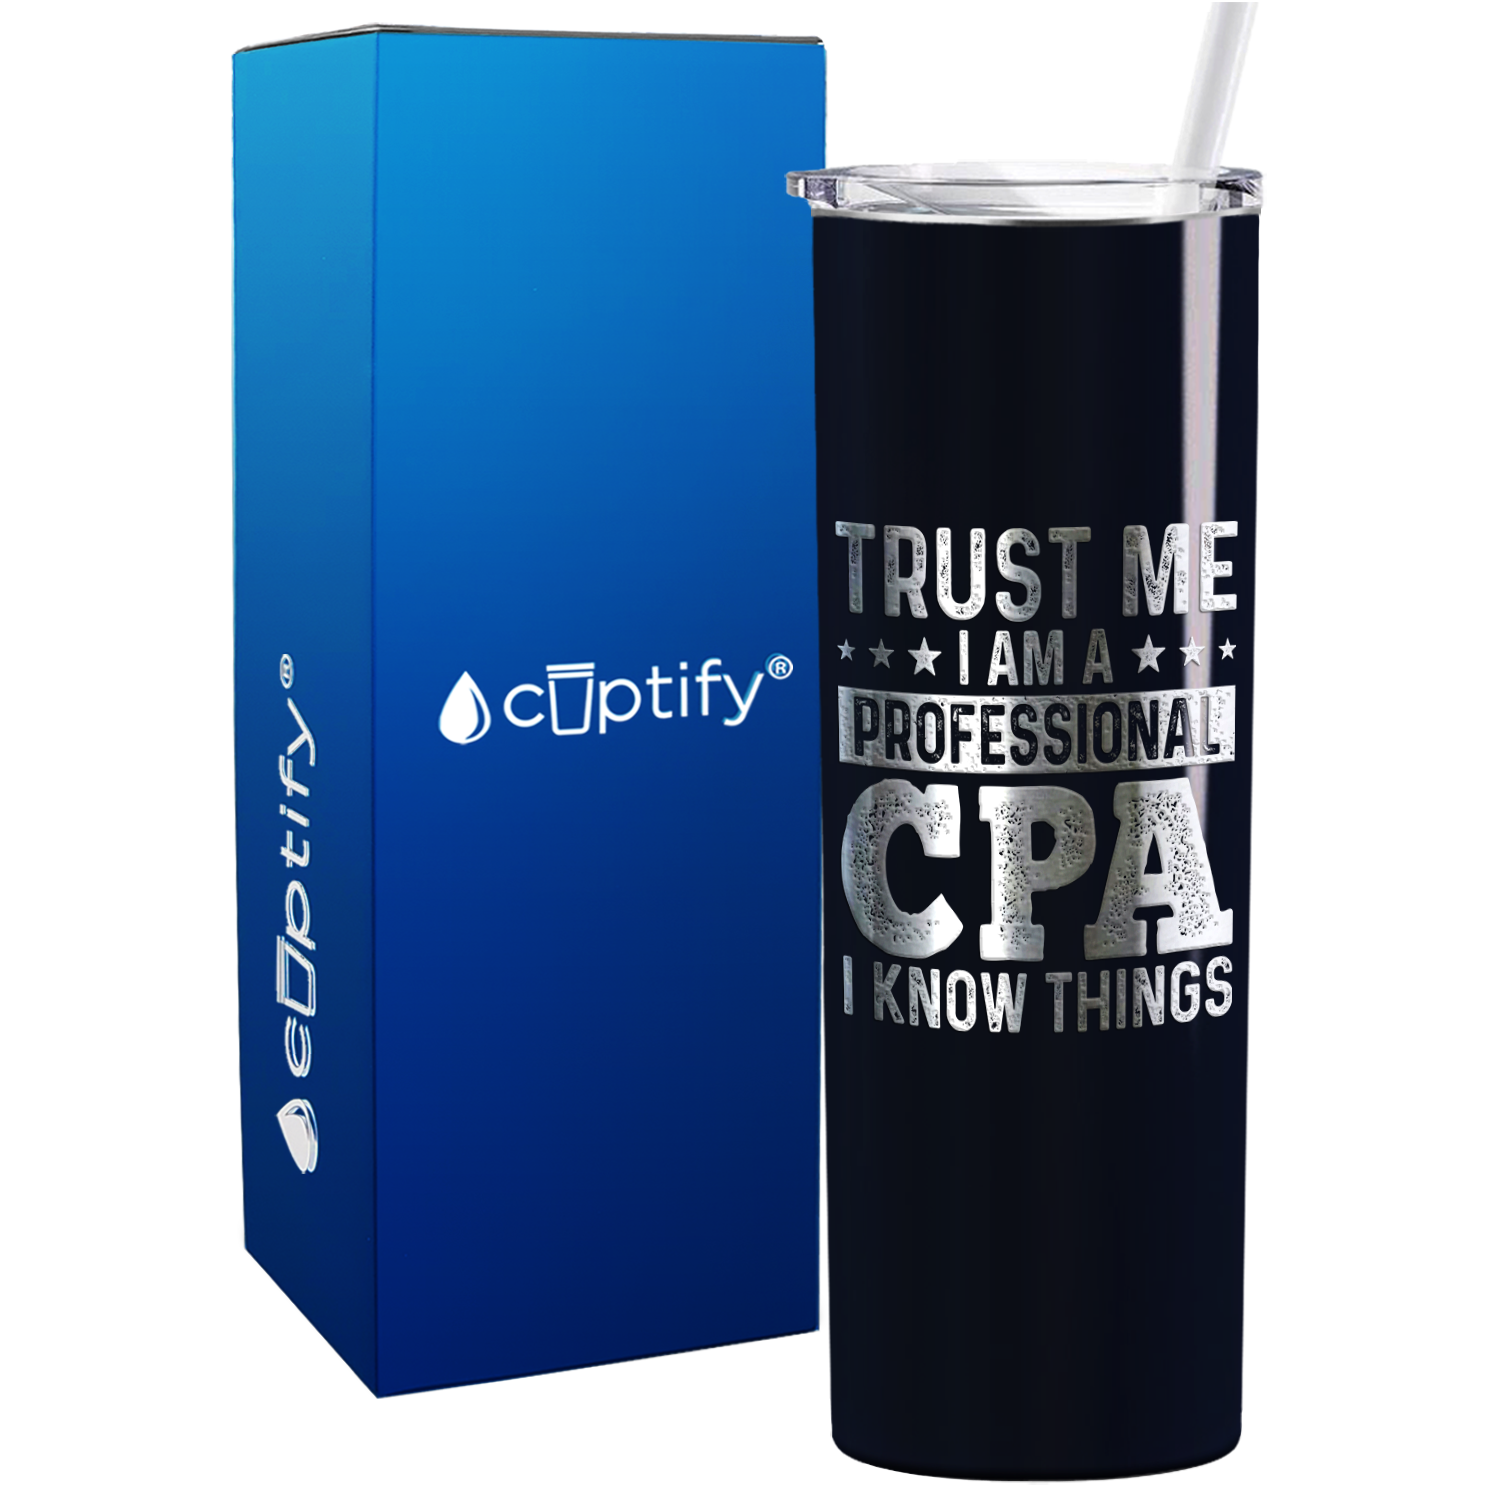 Trust Me I am a Professional CPA on 20oz Skinny Stainless Steel Tumbler